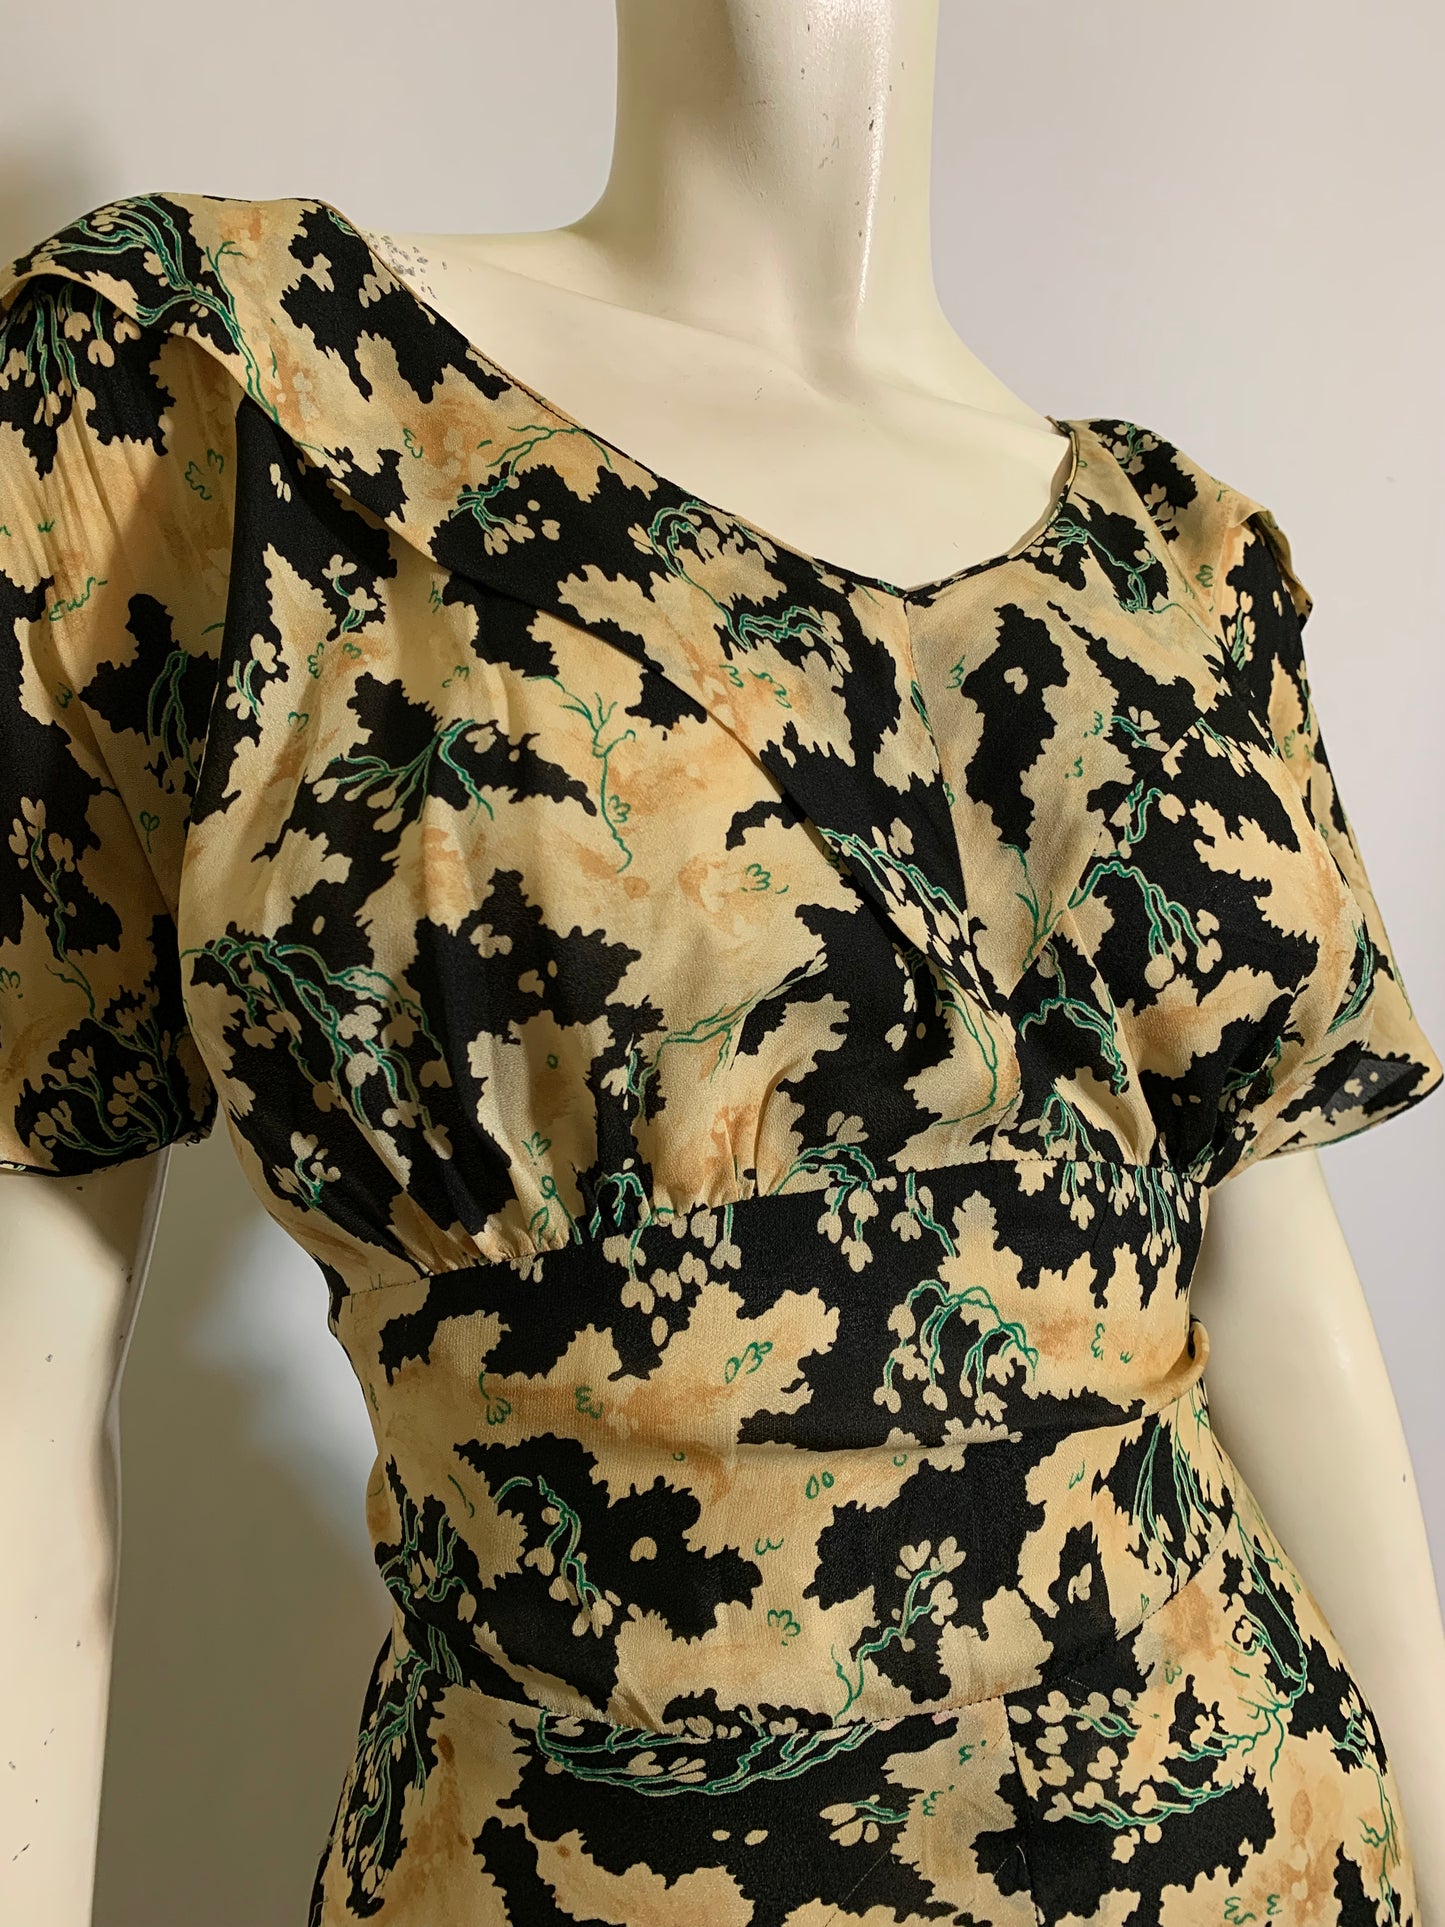 Asian Floral Print Silk Dress and Jacket Set with Bow Tie Collar circa 1930s